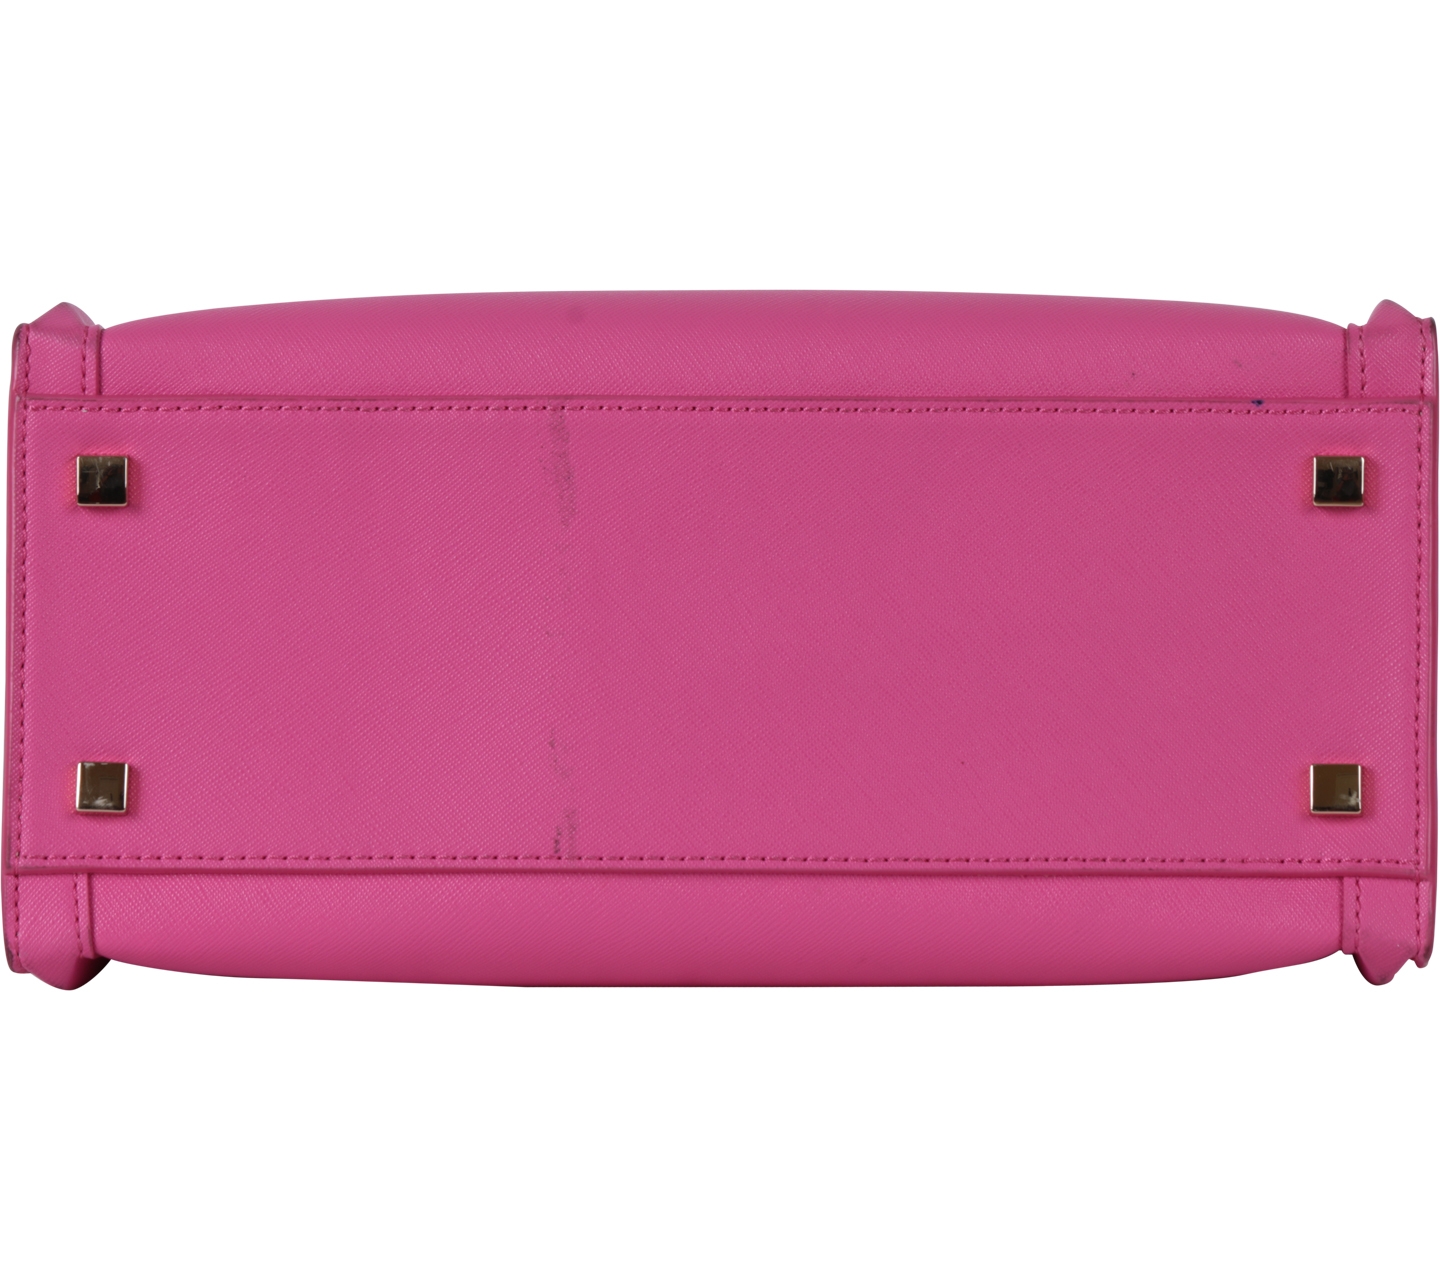 Charles and Keith Pink Satchel